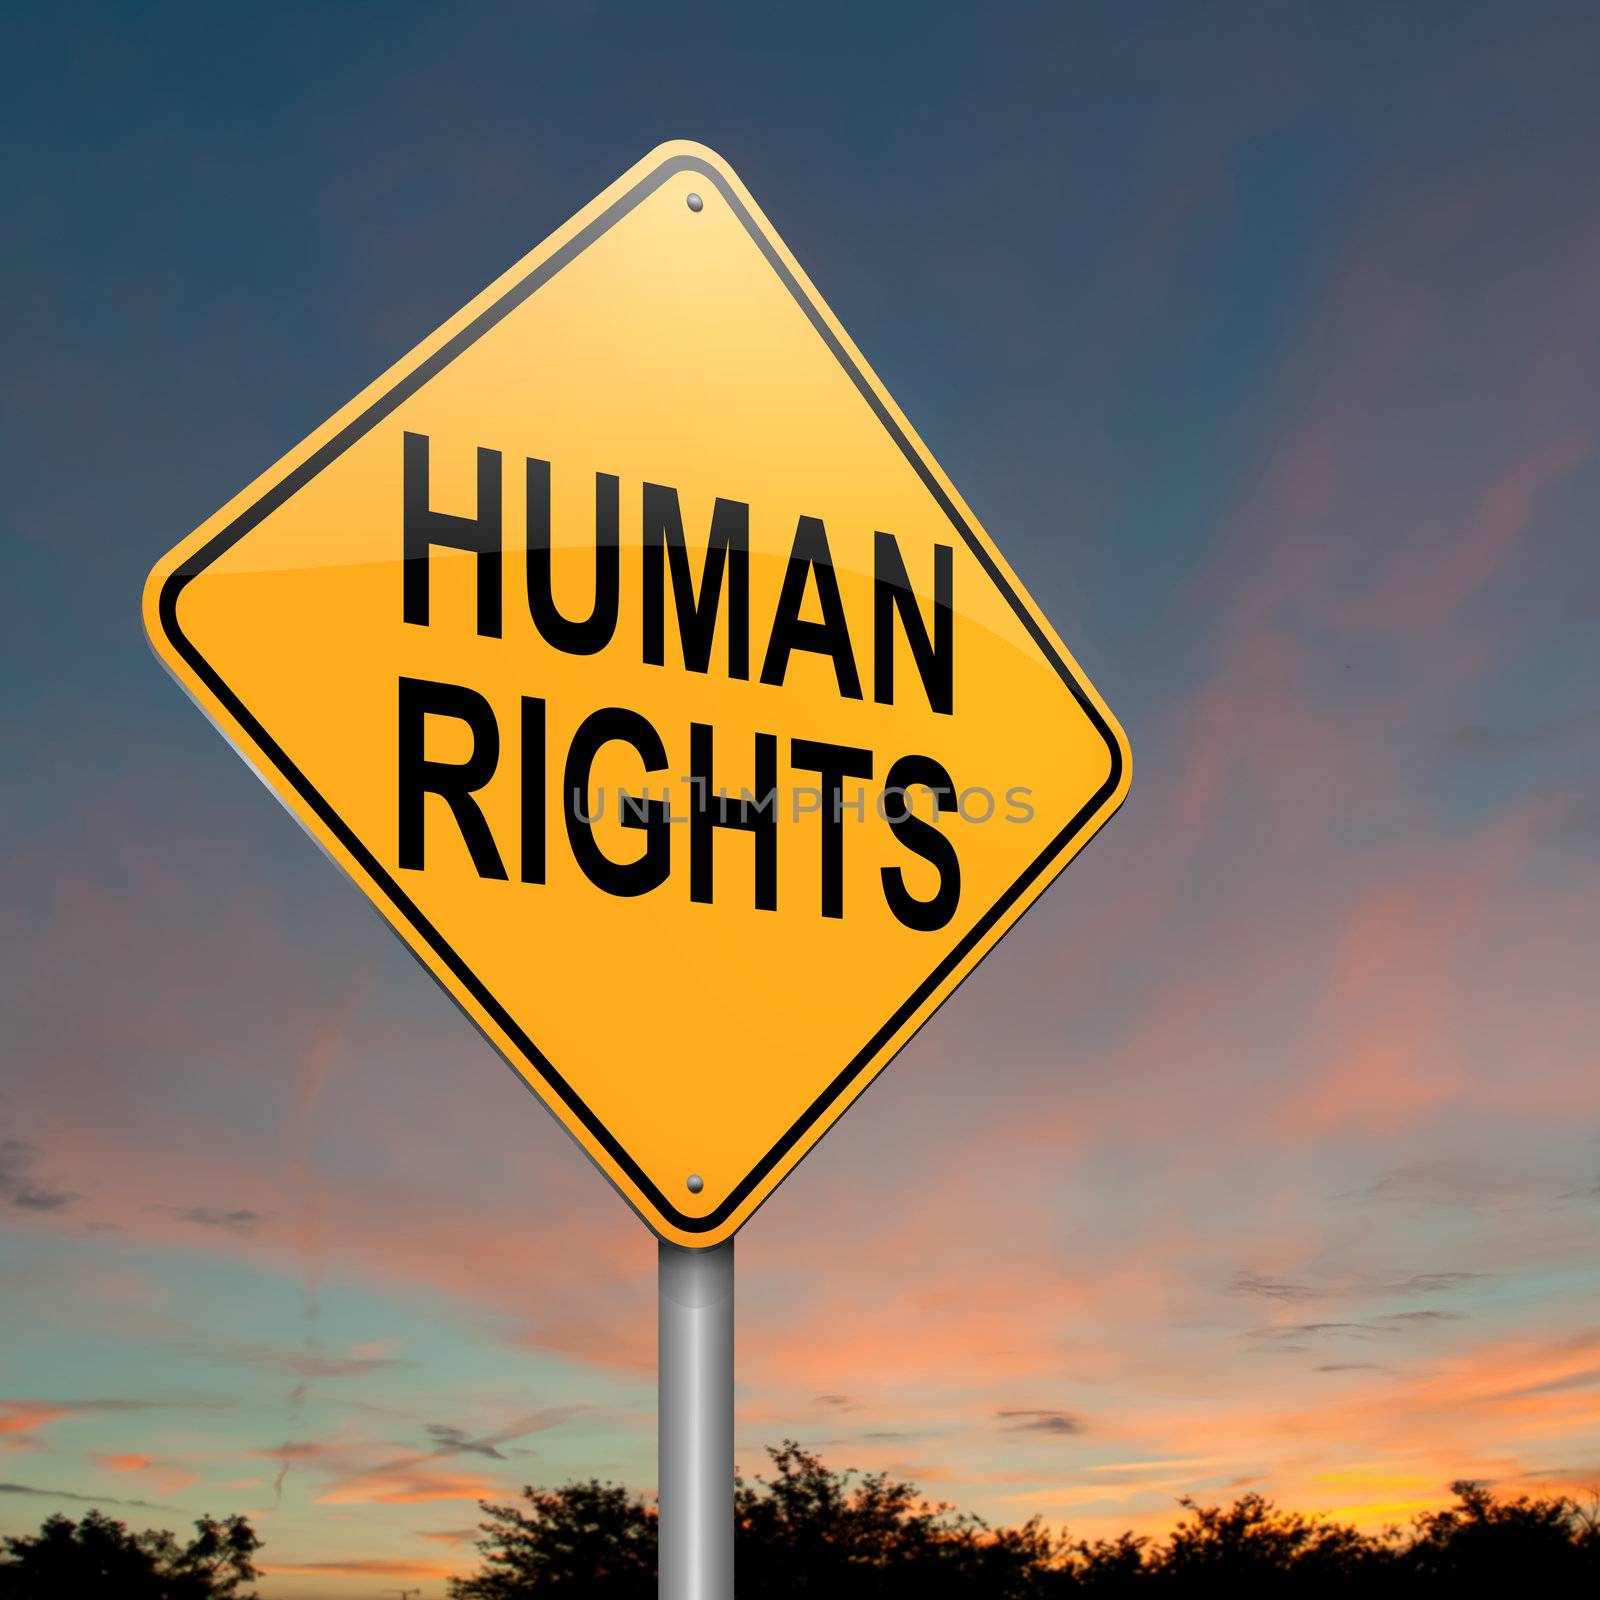 Illustration depicting a roadsign with a human rights concept. Dusk sky background.